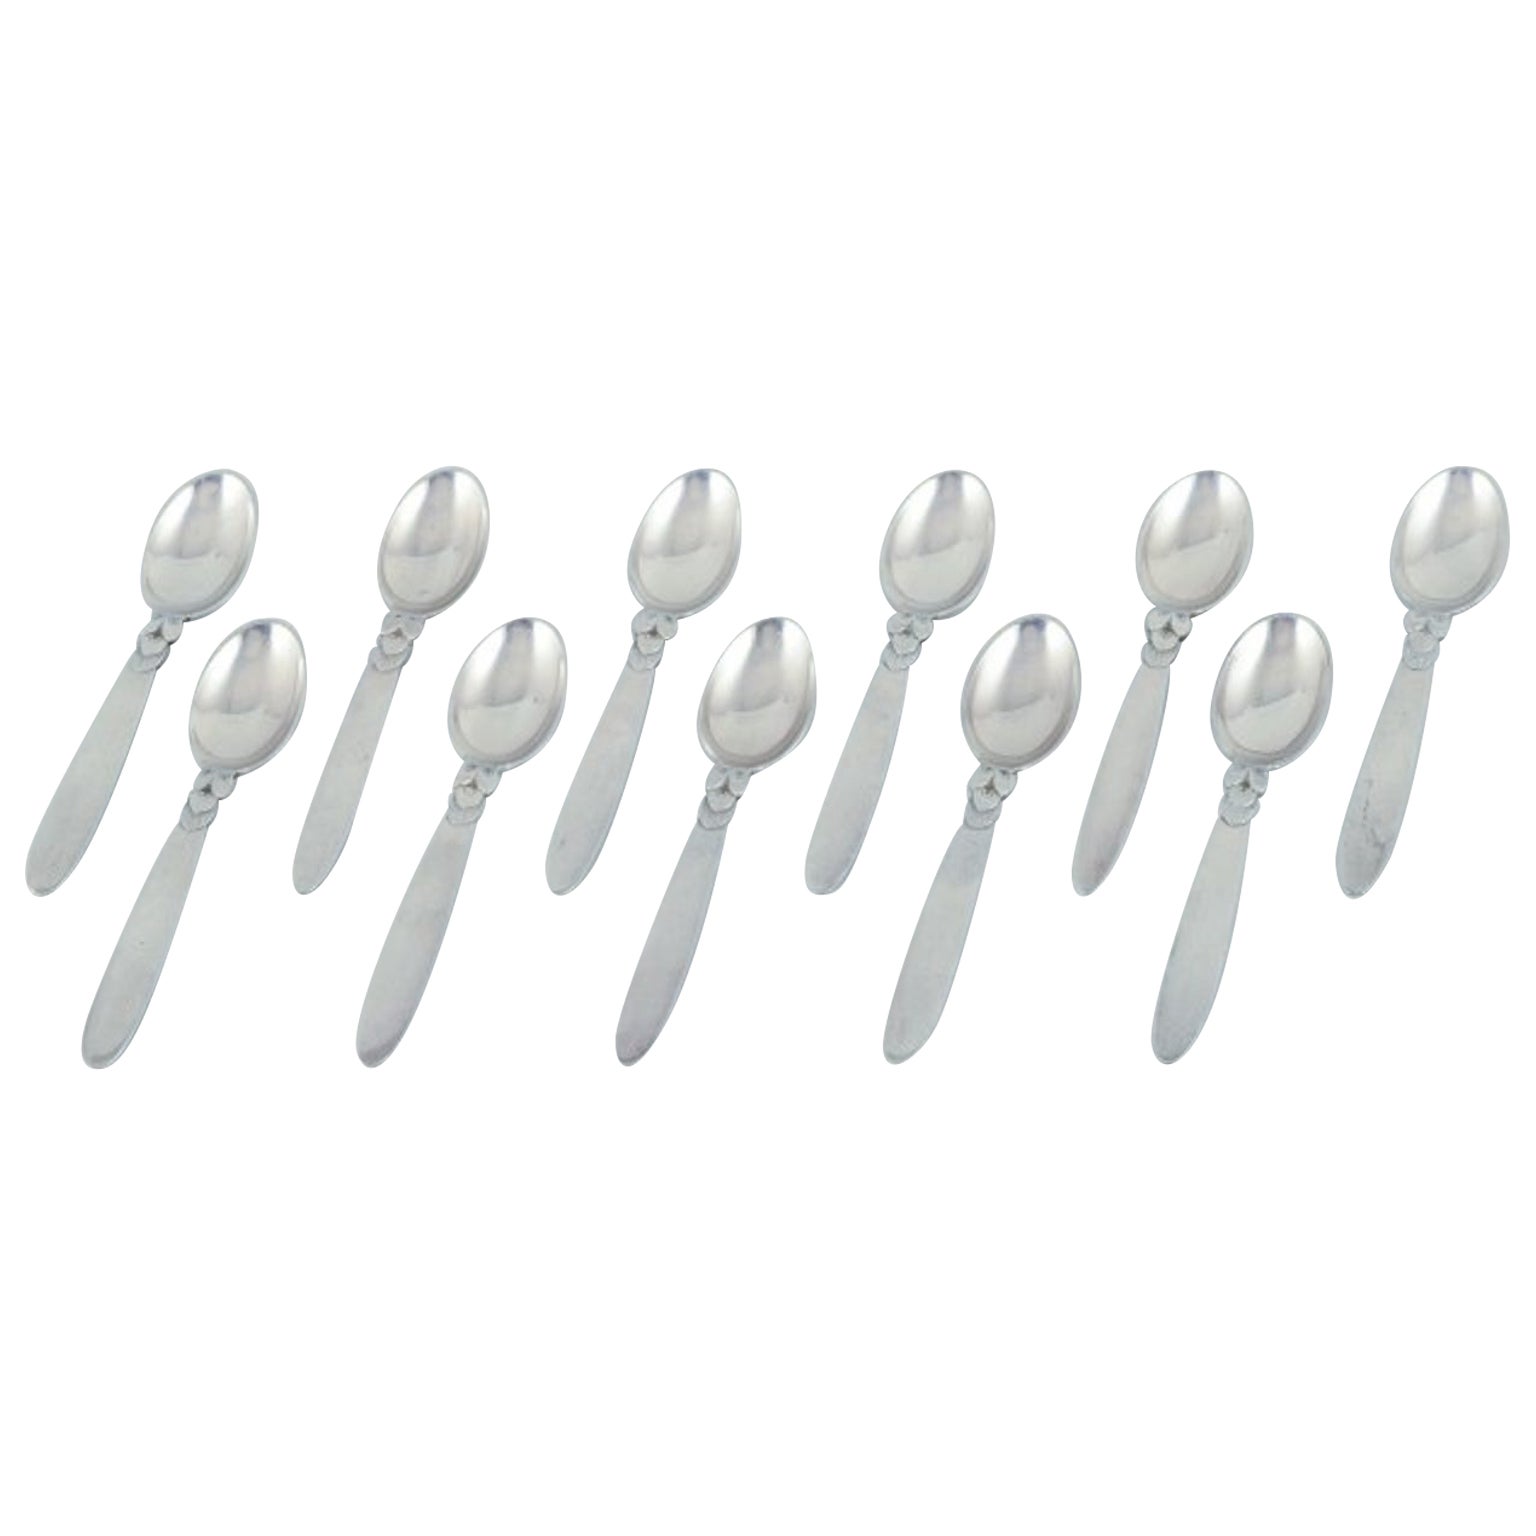 Georg Jensen Cactus. Eleven coffee spoons in sterling silver.